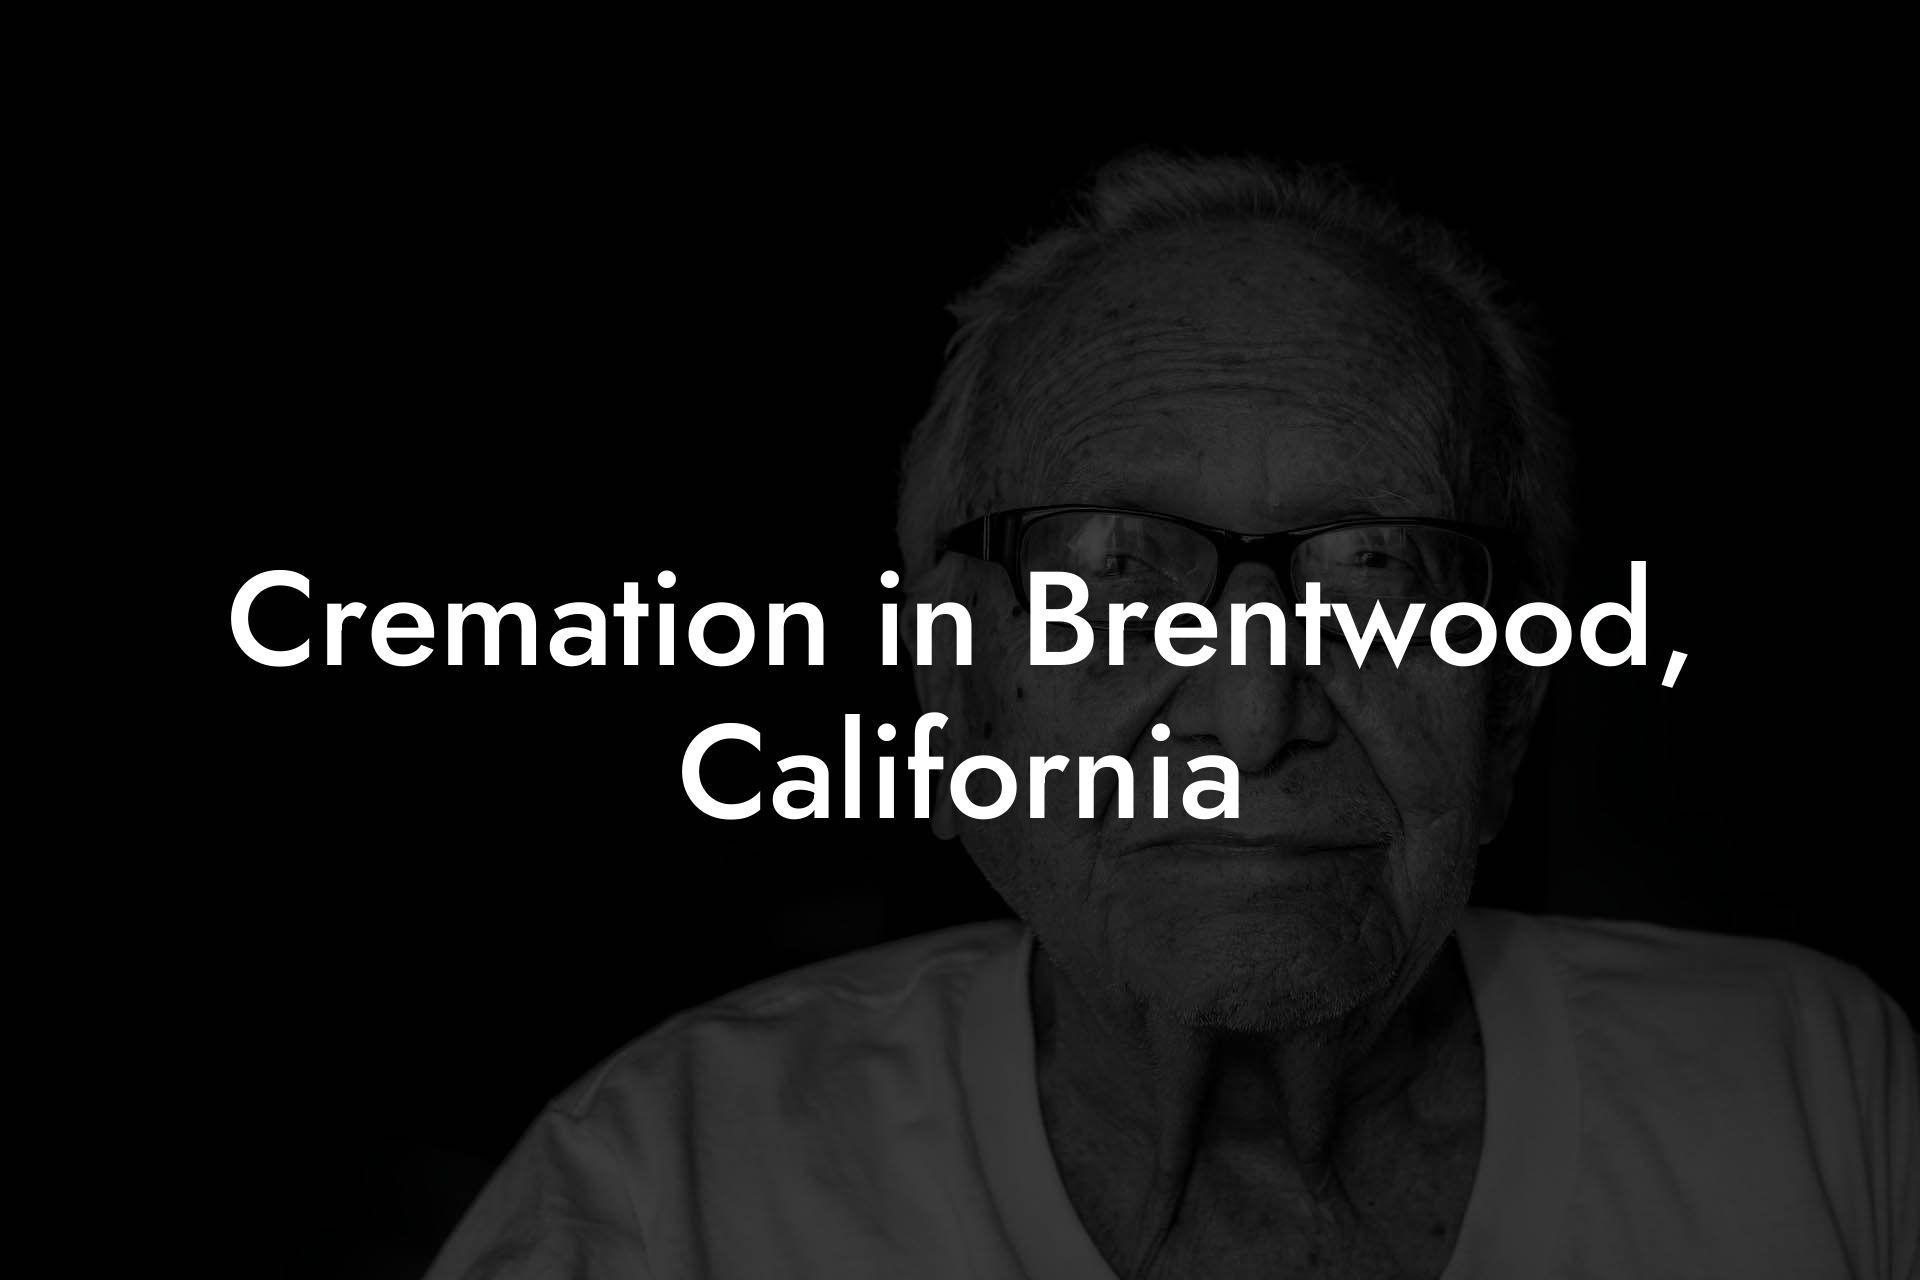 Cremation in Brentwood, California